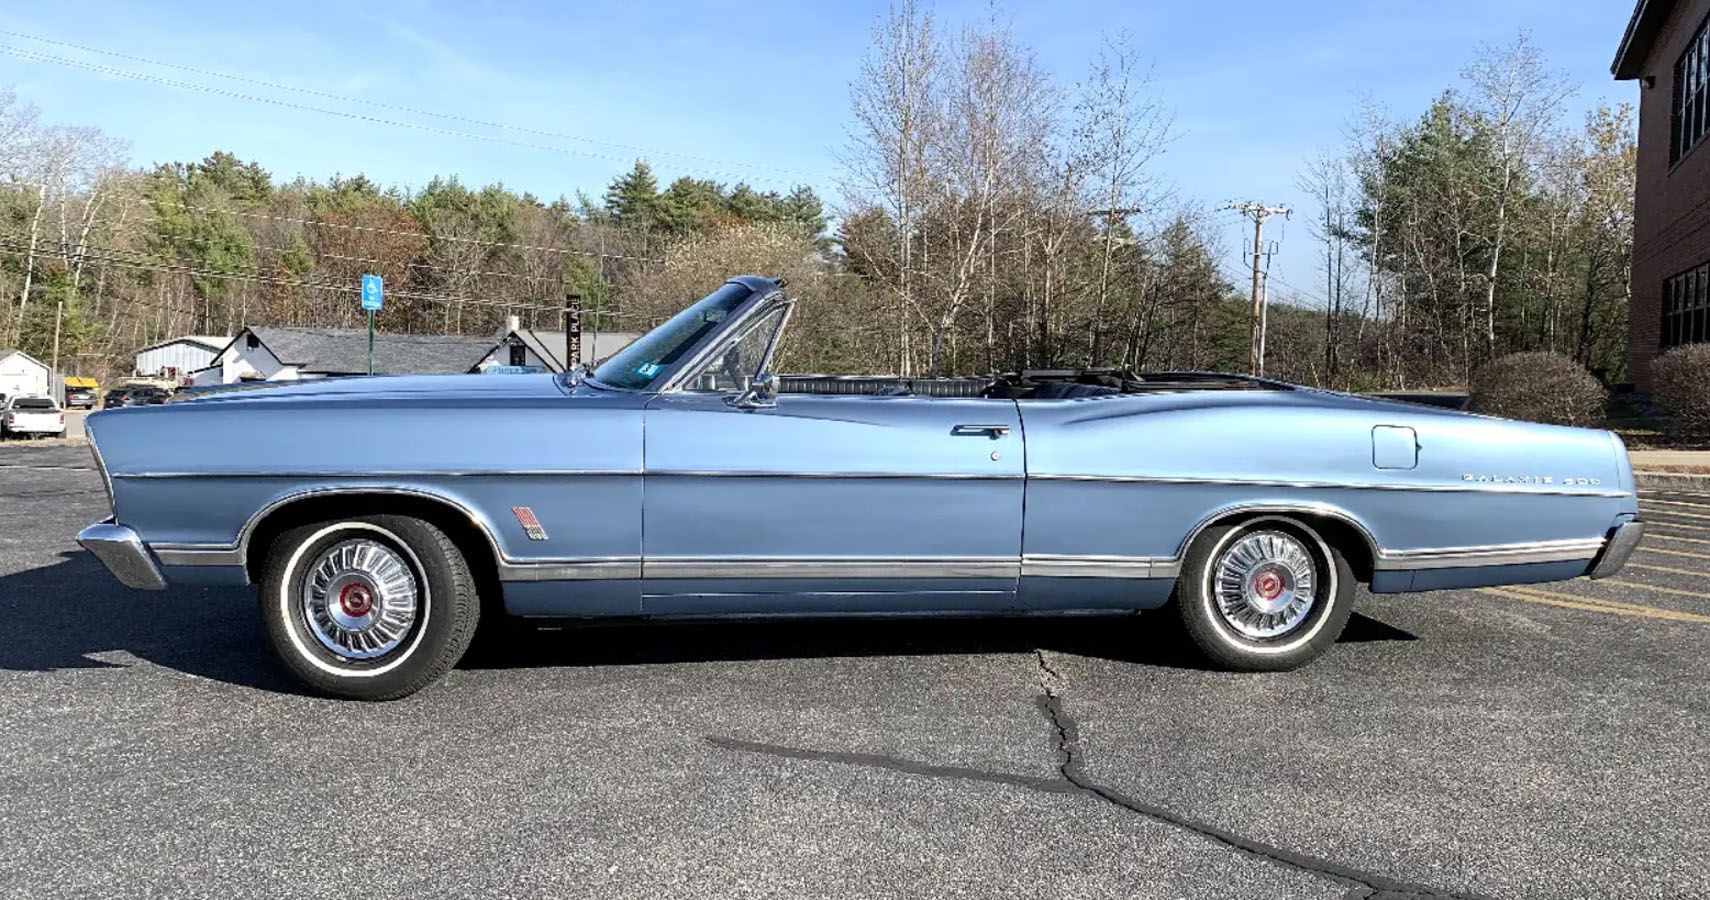 Here's What Collectors Should Know About The 1967 Ford Galaxie 500